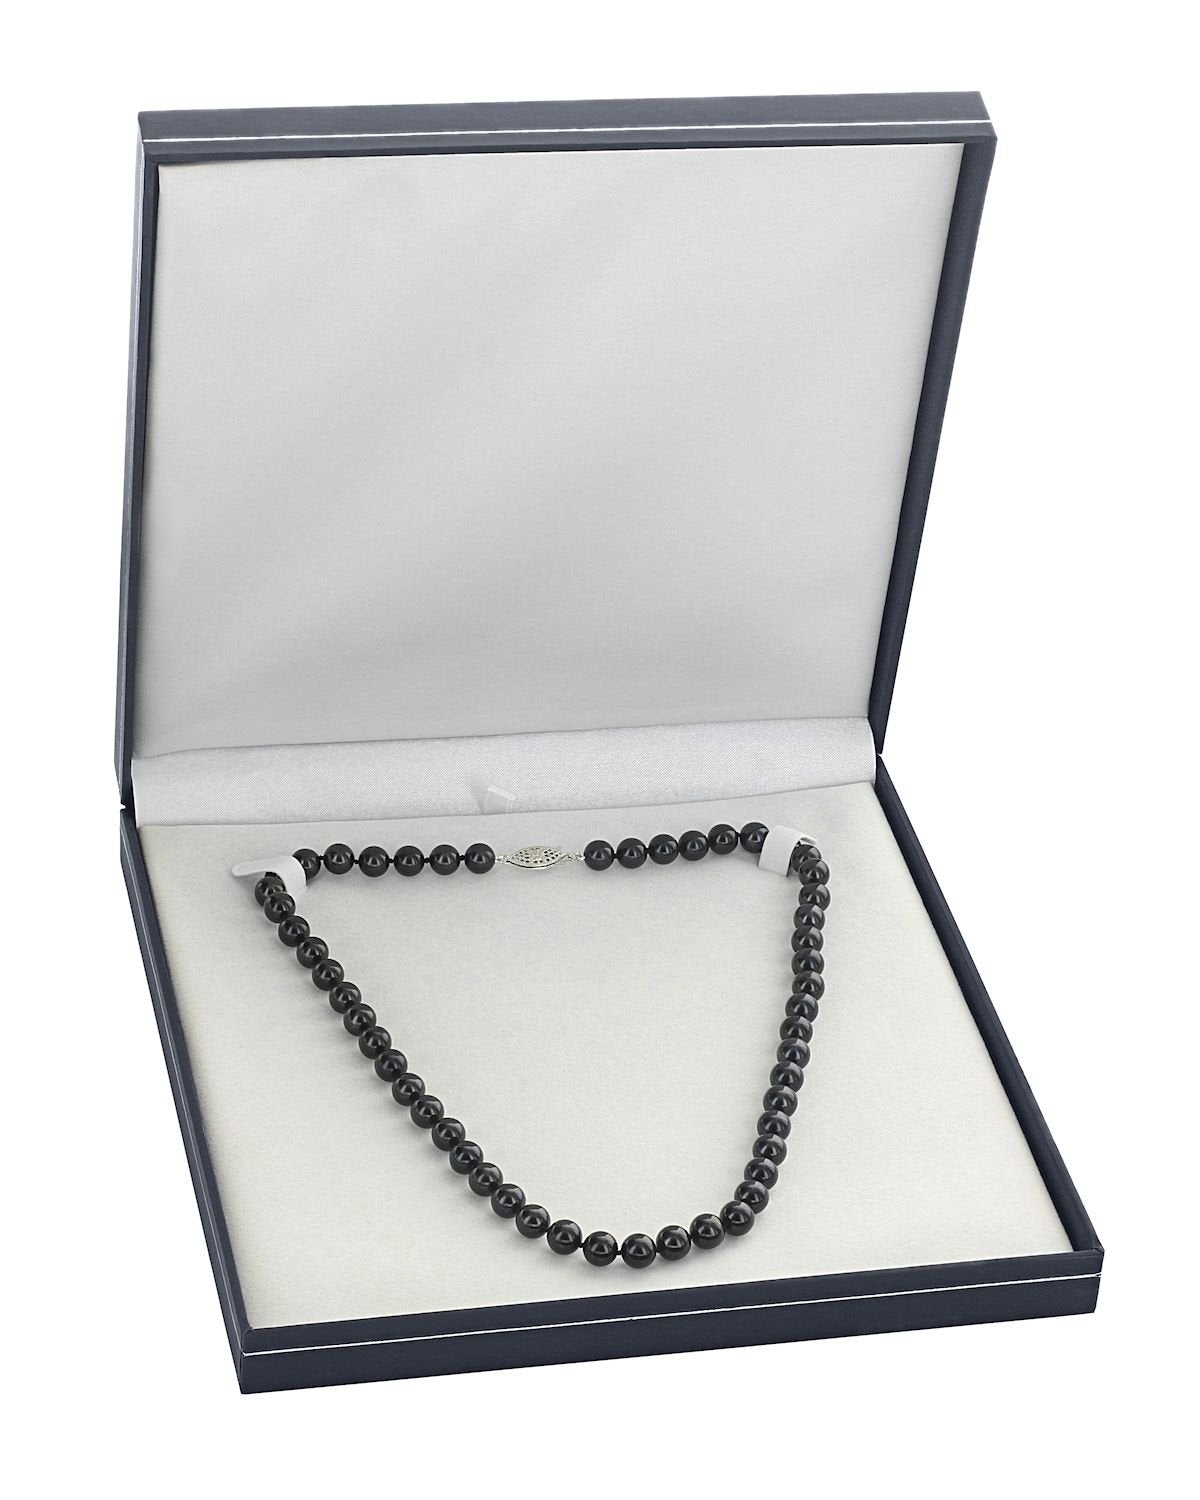 6.0-6.5mm Japanese Akoya Black Pearl Necklace- AA+ Quality - Secondary Image